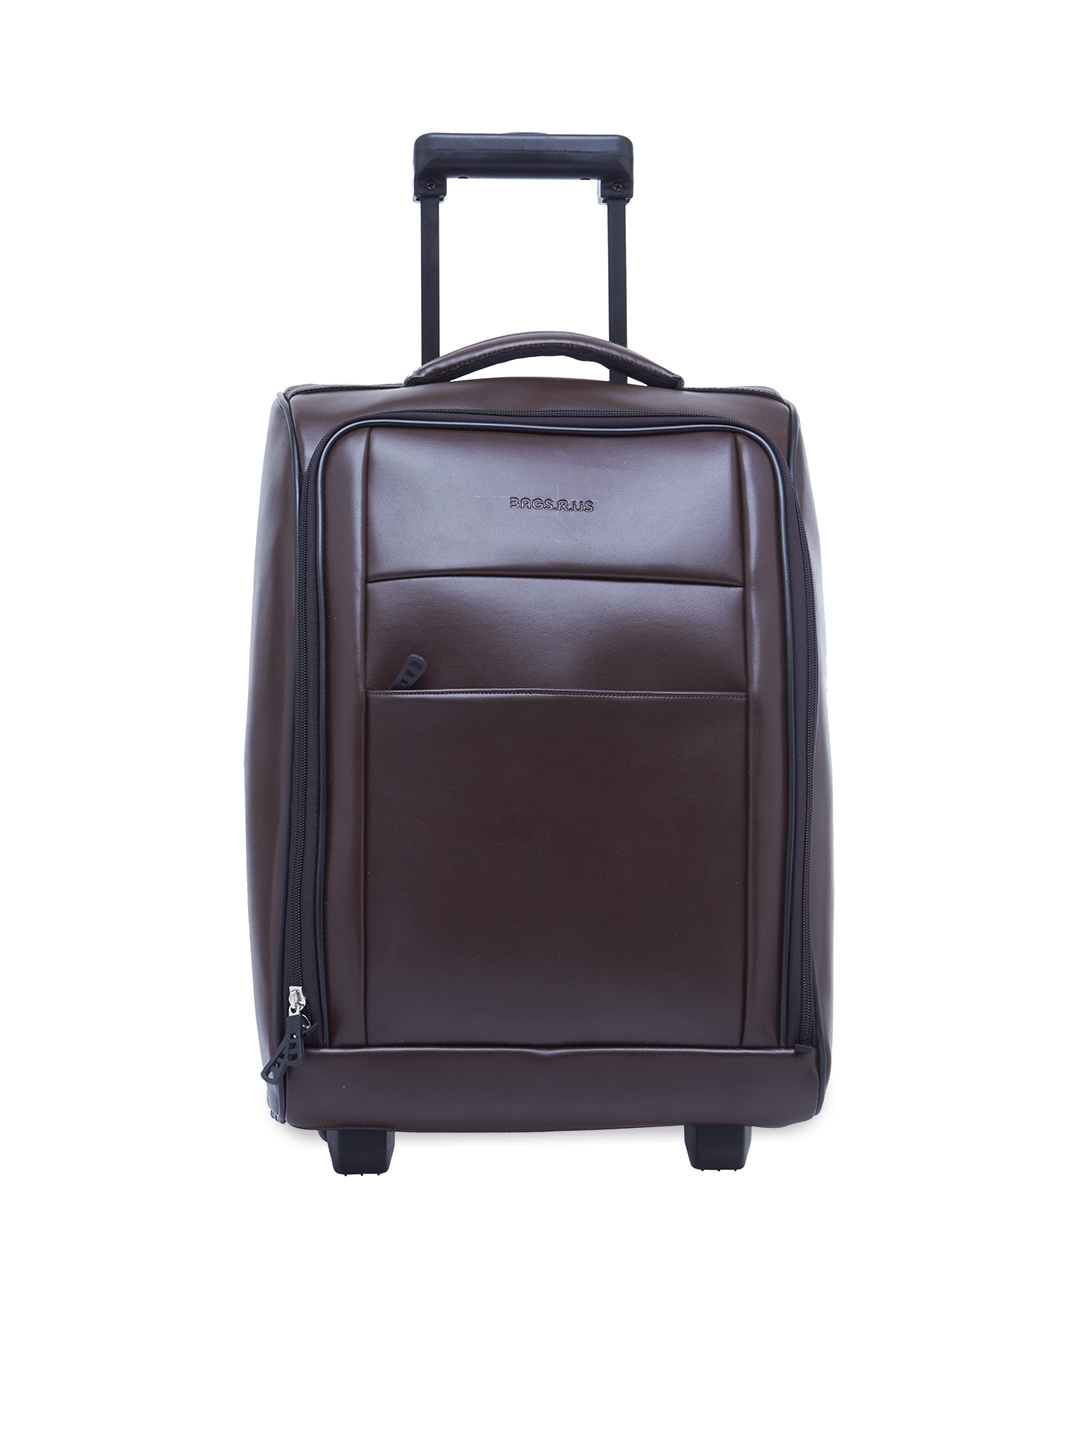 Leather Travel Bag | Leather Luggage Bags | Leather Briefcase